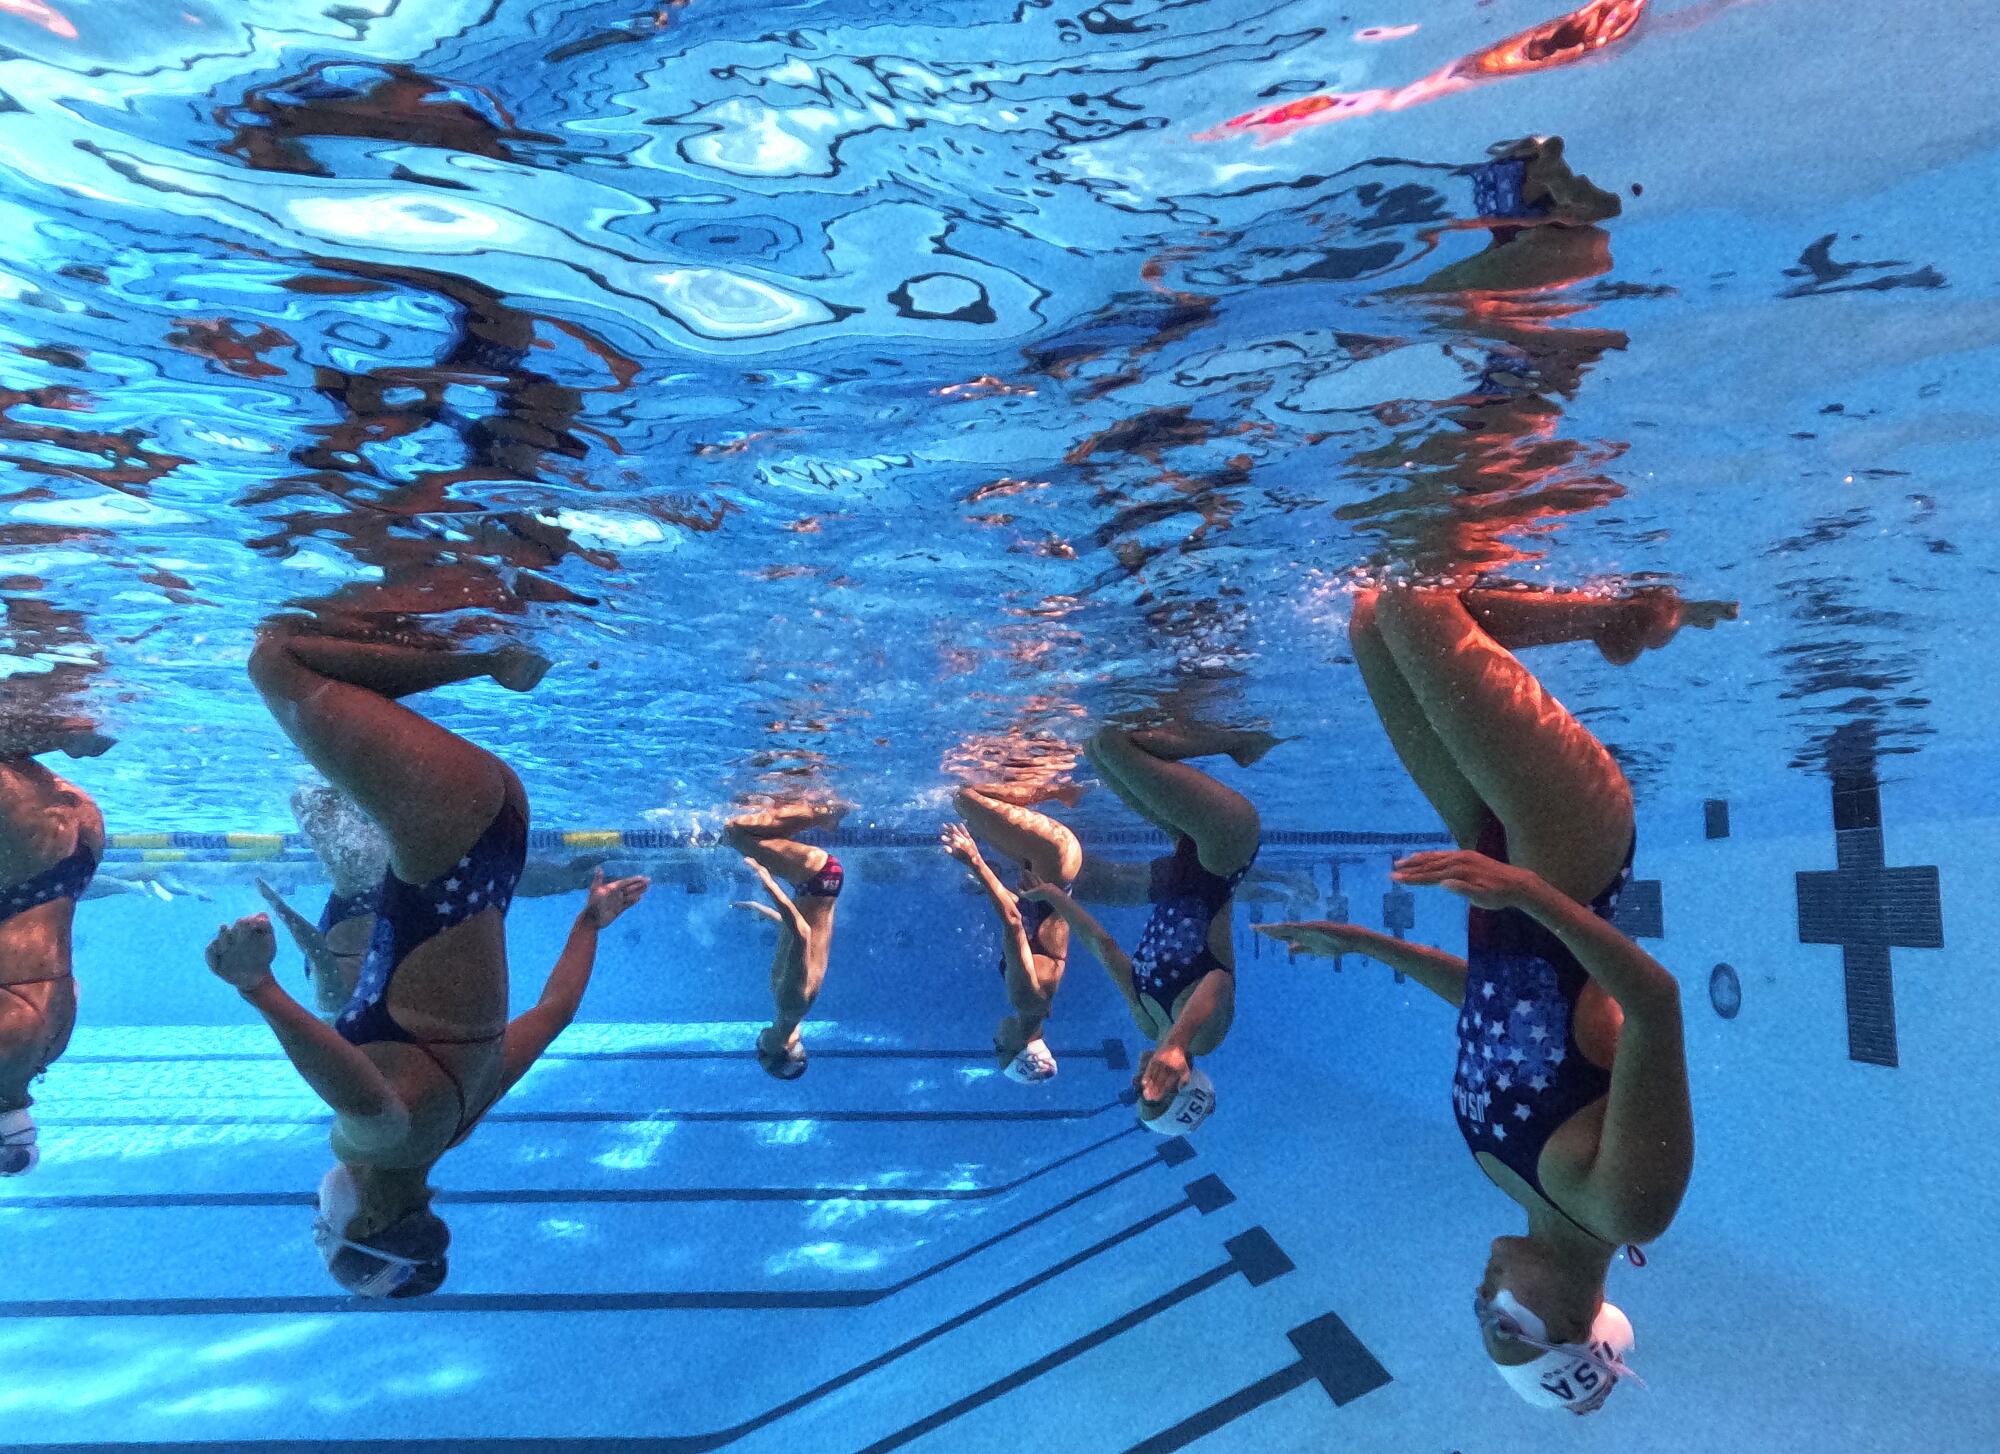 Members of the U.S. Artistic Swimming team, including Calista Liu, right, practice at UCLA.